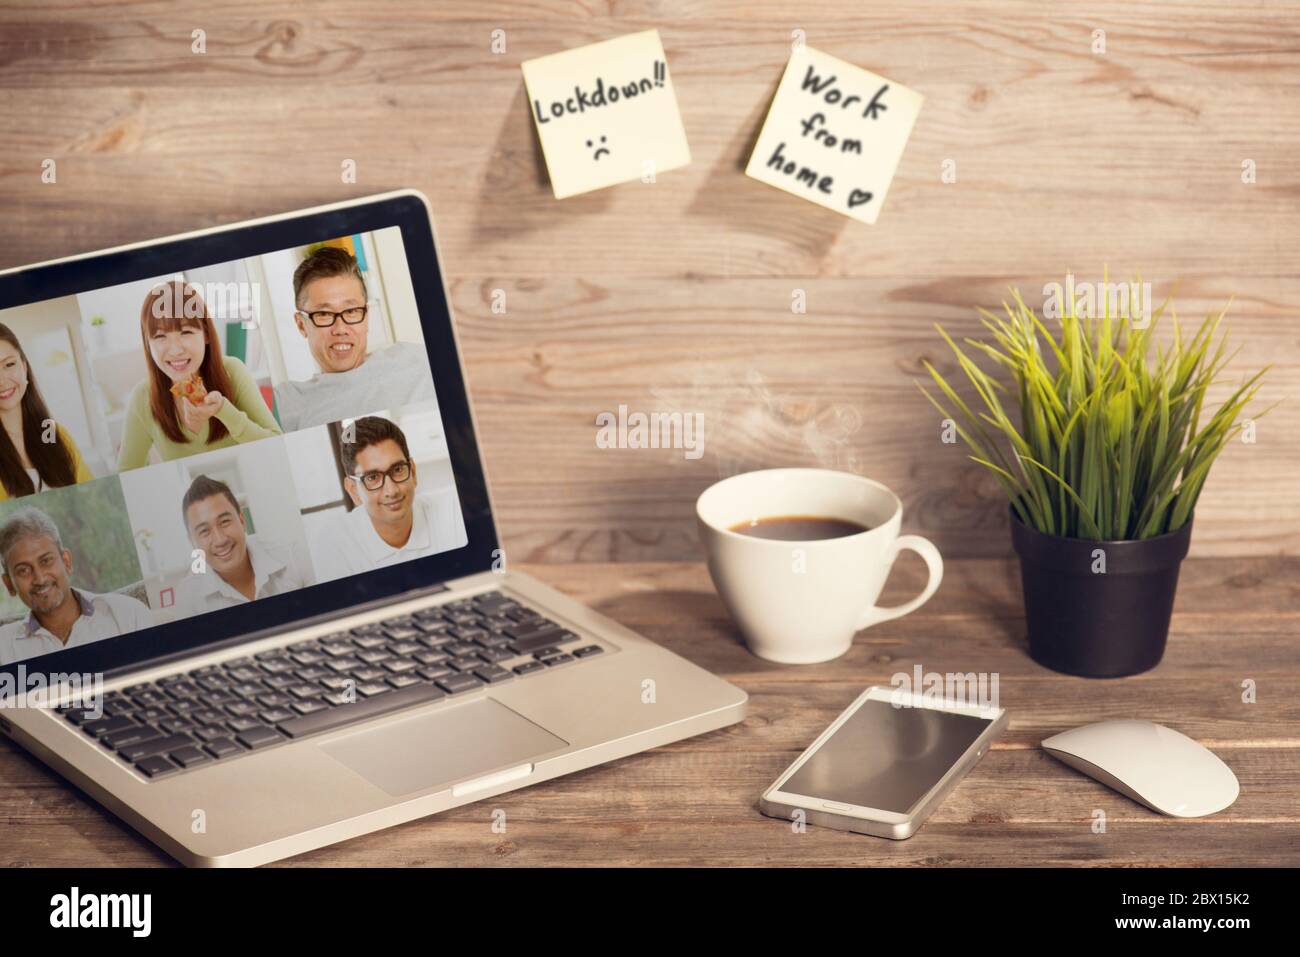 Work from home, video conferencing with coworkers due to Covid 19 pandemic lockdown. Stock Photo